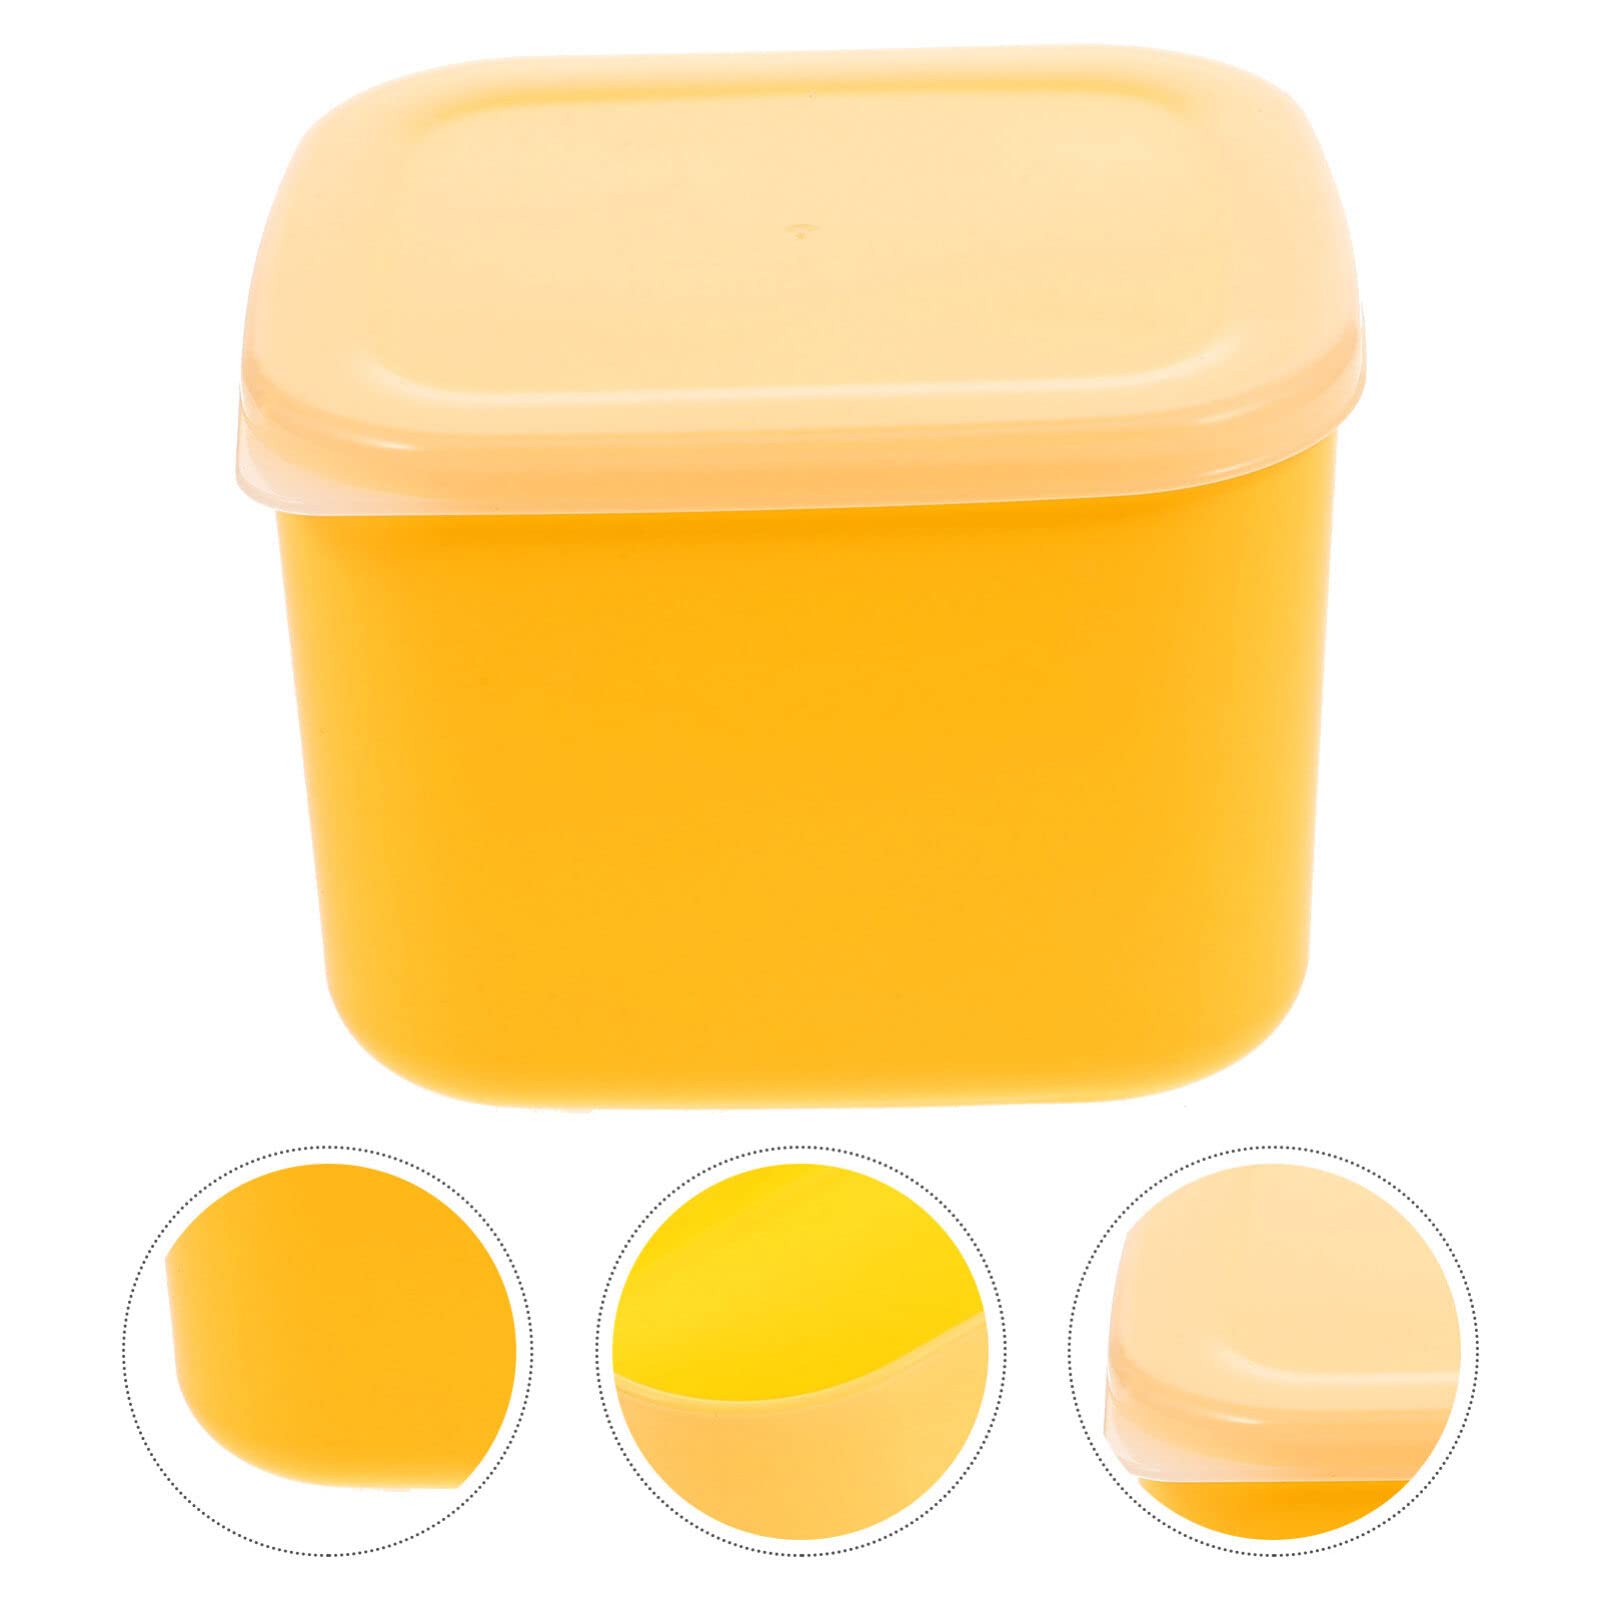 Healvian Plastic Cheese Storage Containers with Airtight Lid Cheese Slice Storage Sealed Food Storage Container Fruit Vegetable Organizer Produce Saver for Fridge 12X11X9CM